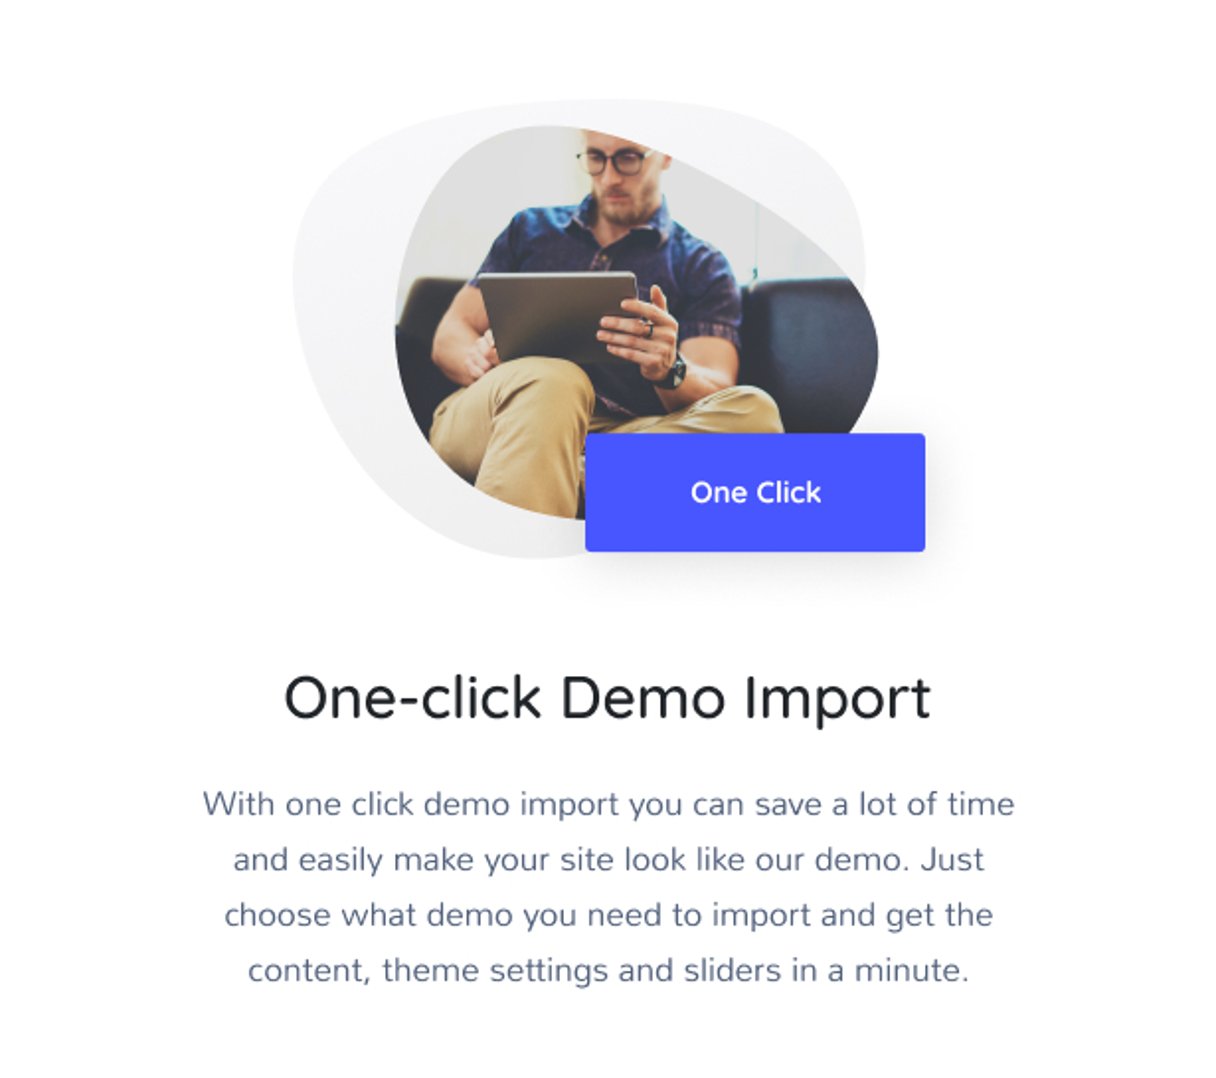 Boldest - Consulting and Marketing Agency WordPress Theme - One-click Demo Import | Cmsmasters studio